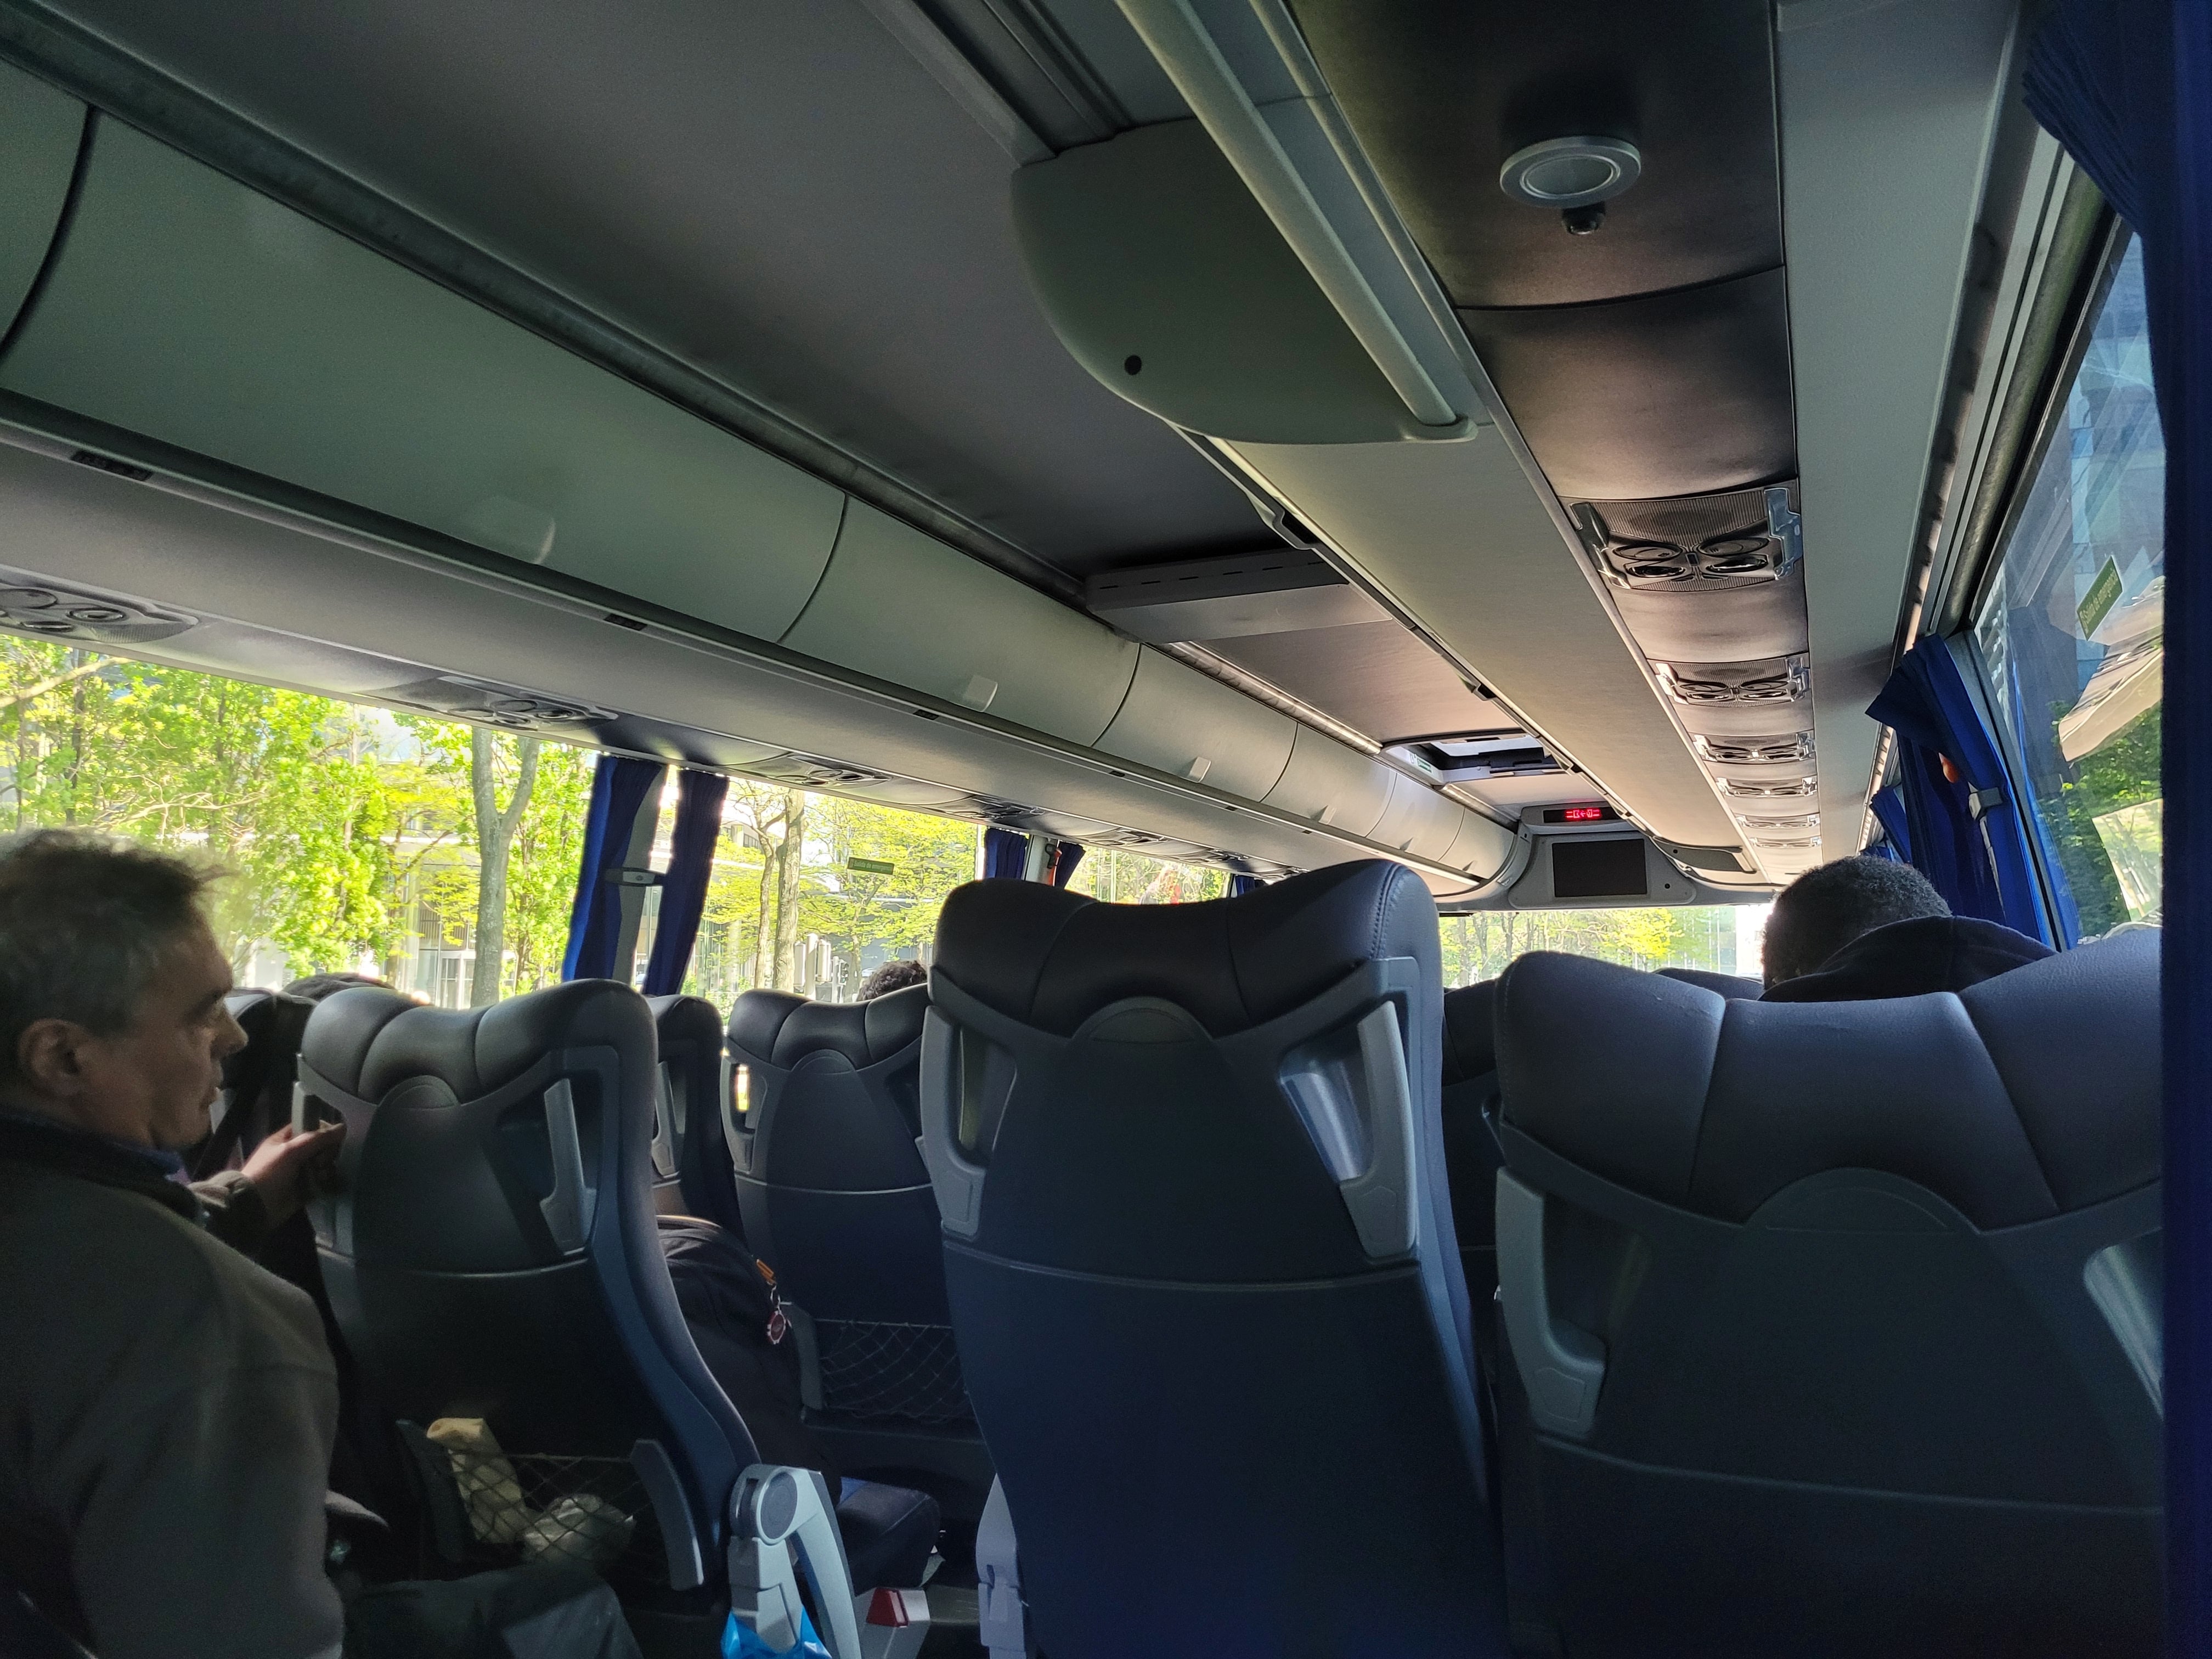 Onboard the nearly 24-hour coach from Brussels to northern Spain